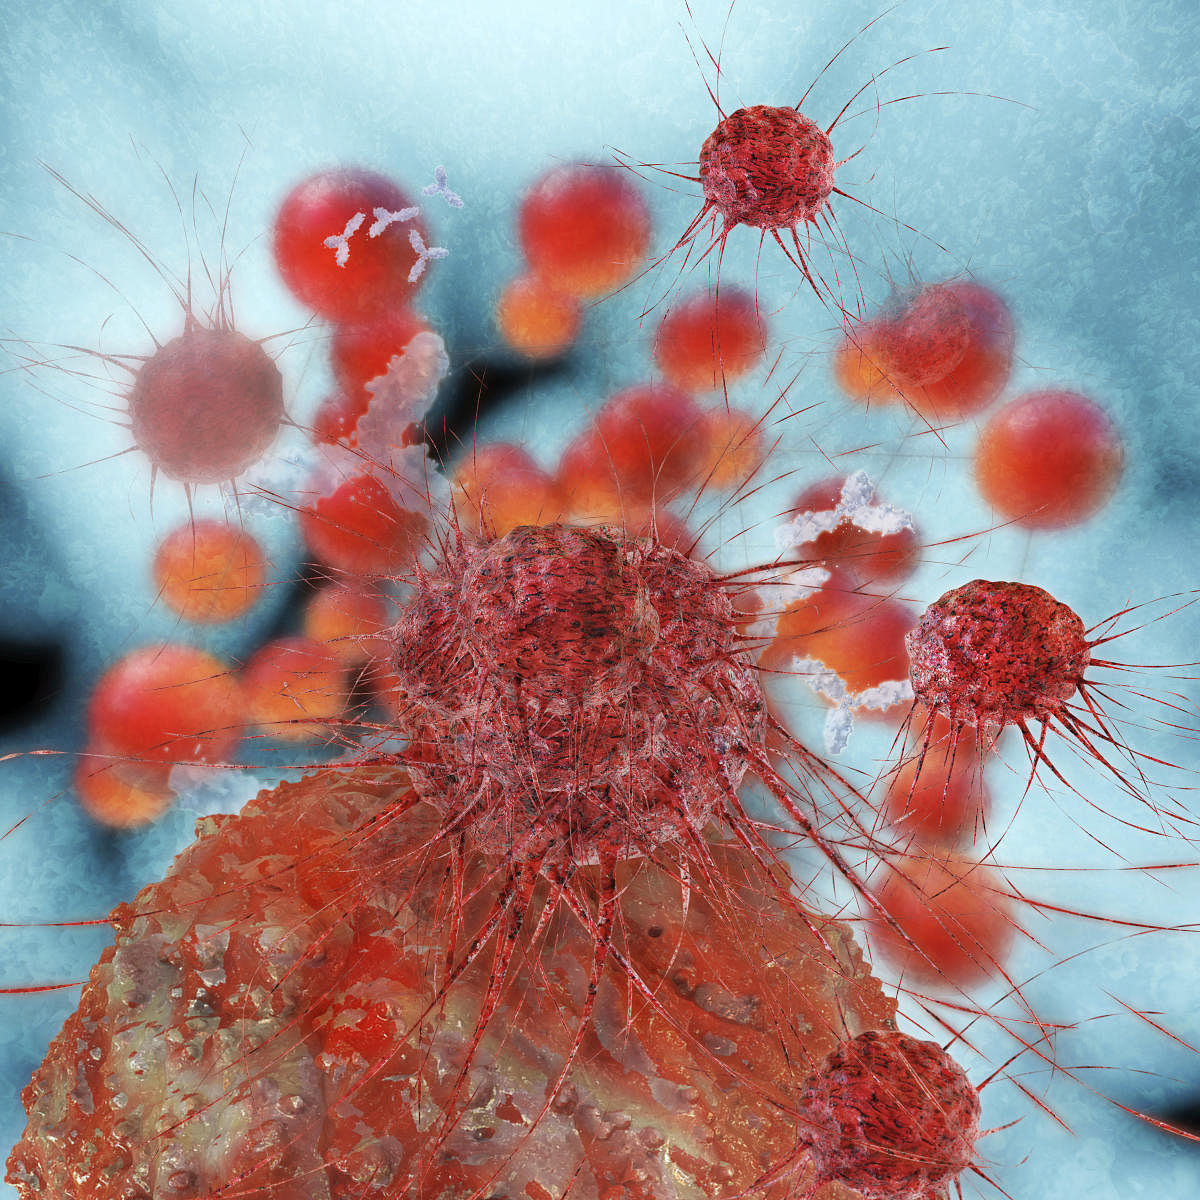 Doctors working to know cancer stages using immune system.